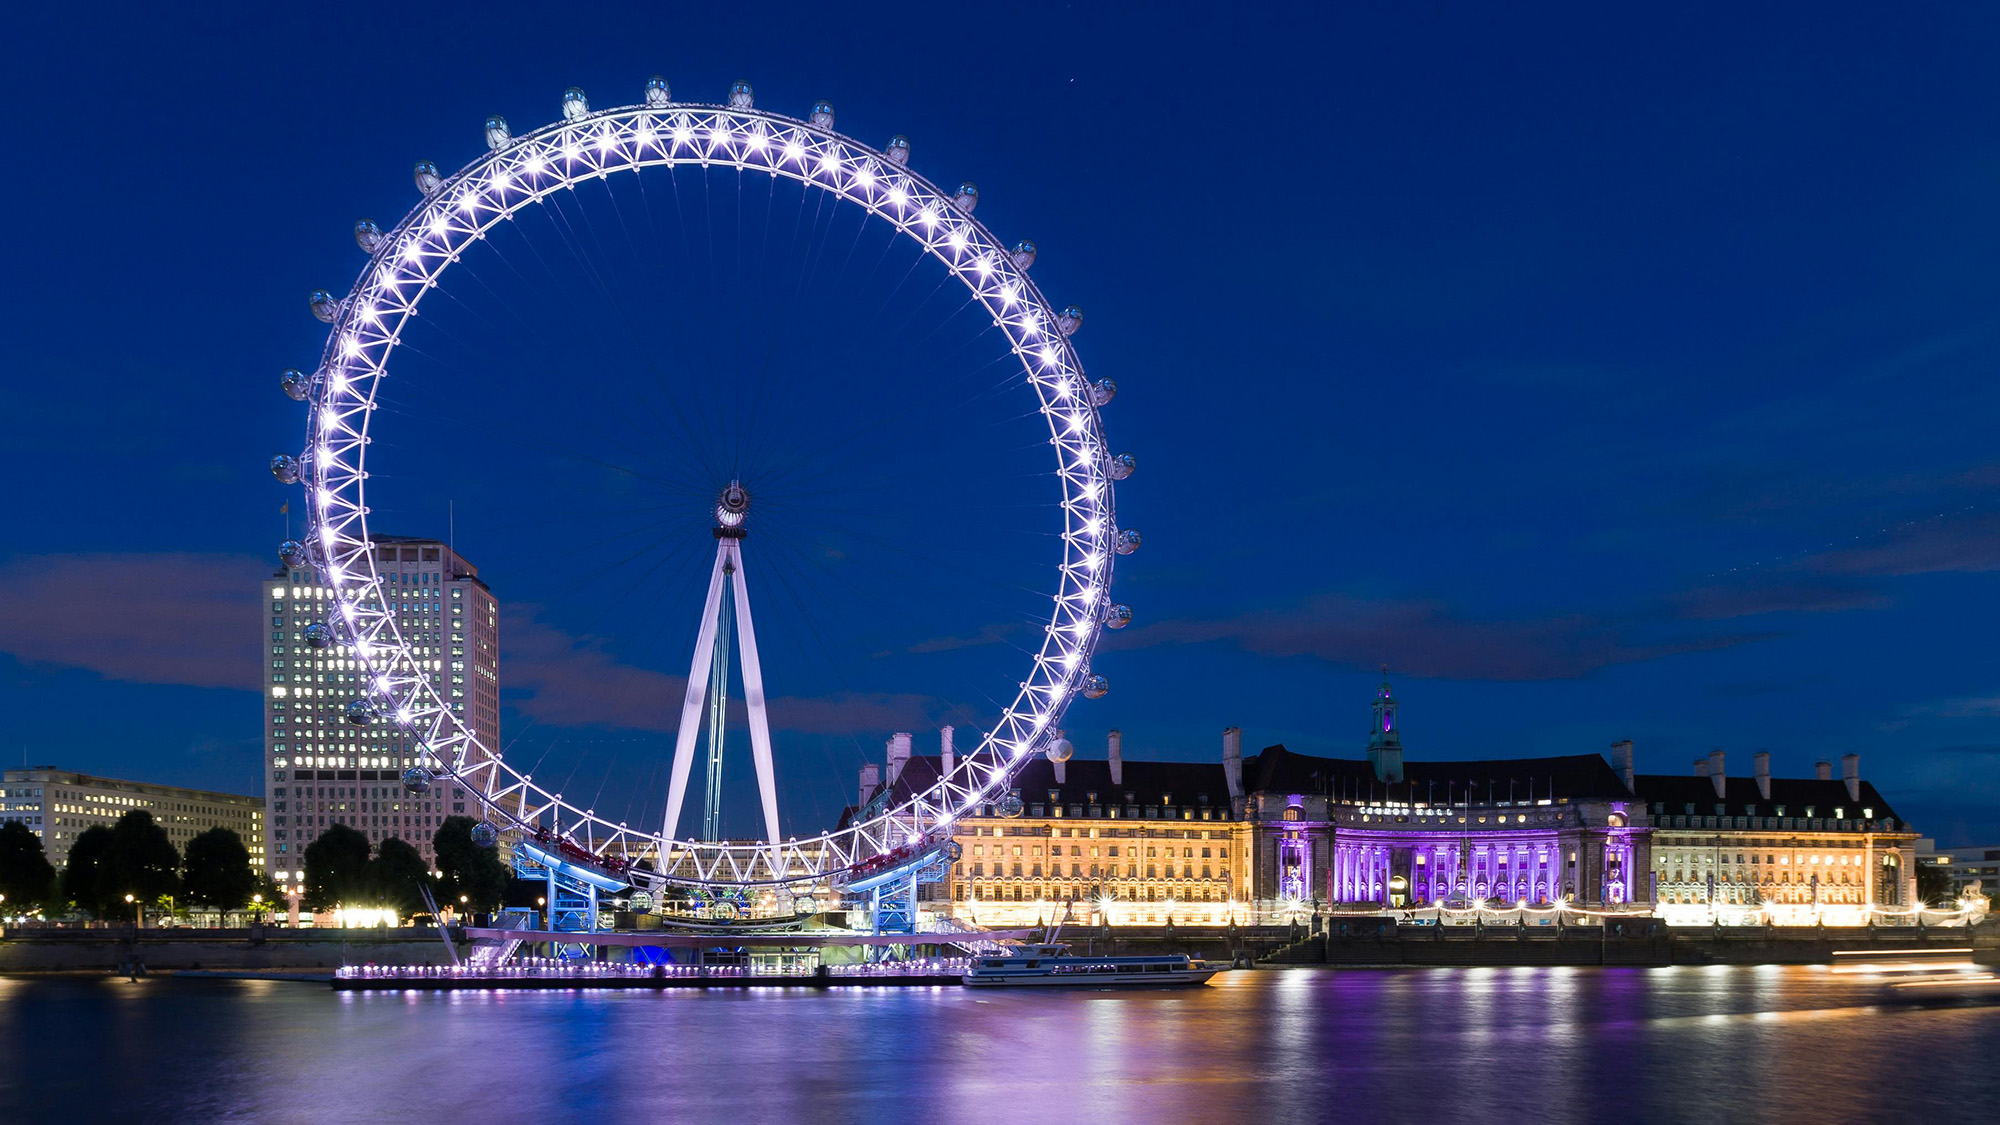 The London Eye cantilevered observation wheel